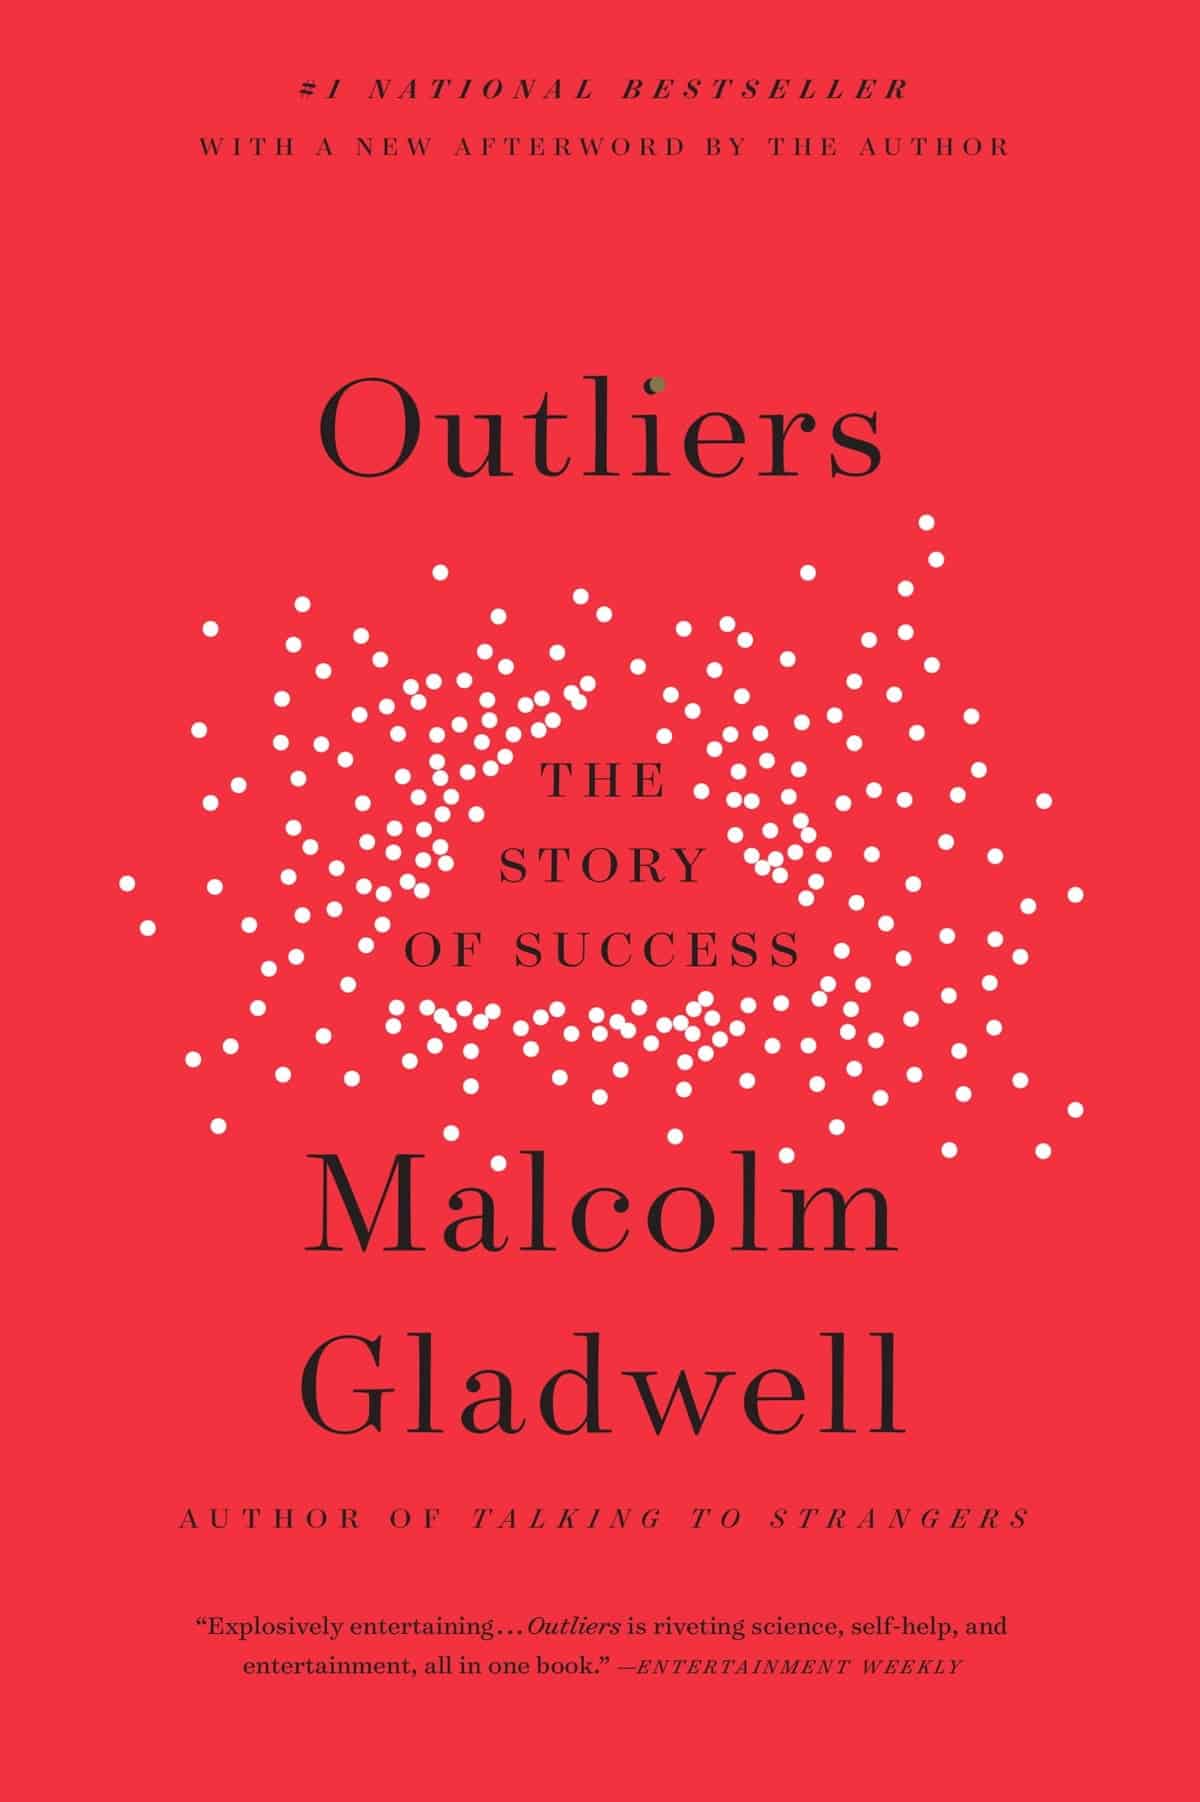 ‘Outliers- The Story of Success’ by Malcolm Gladwell